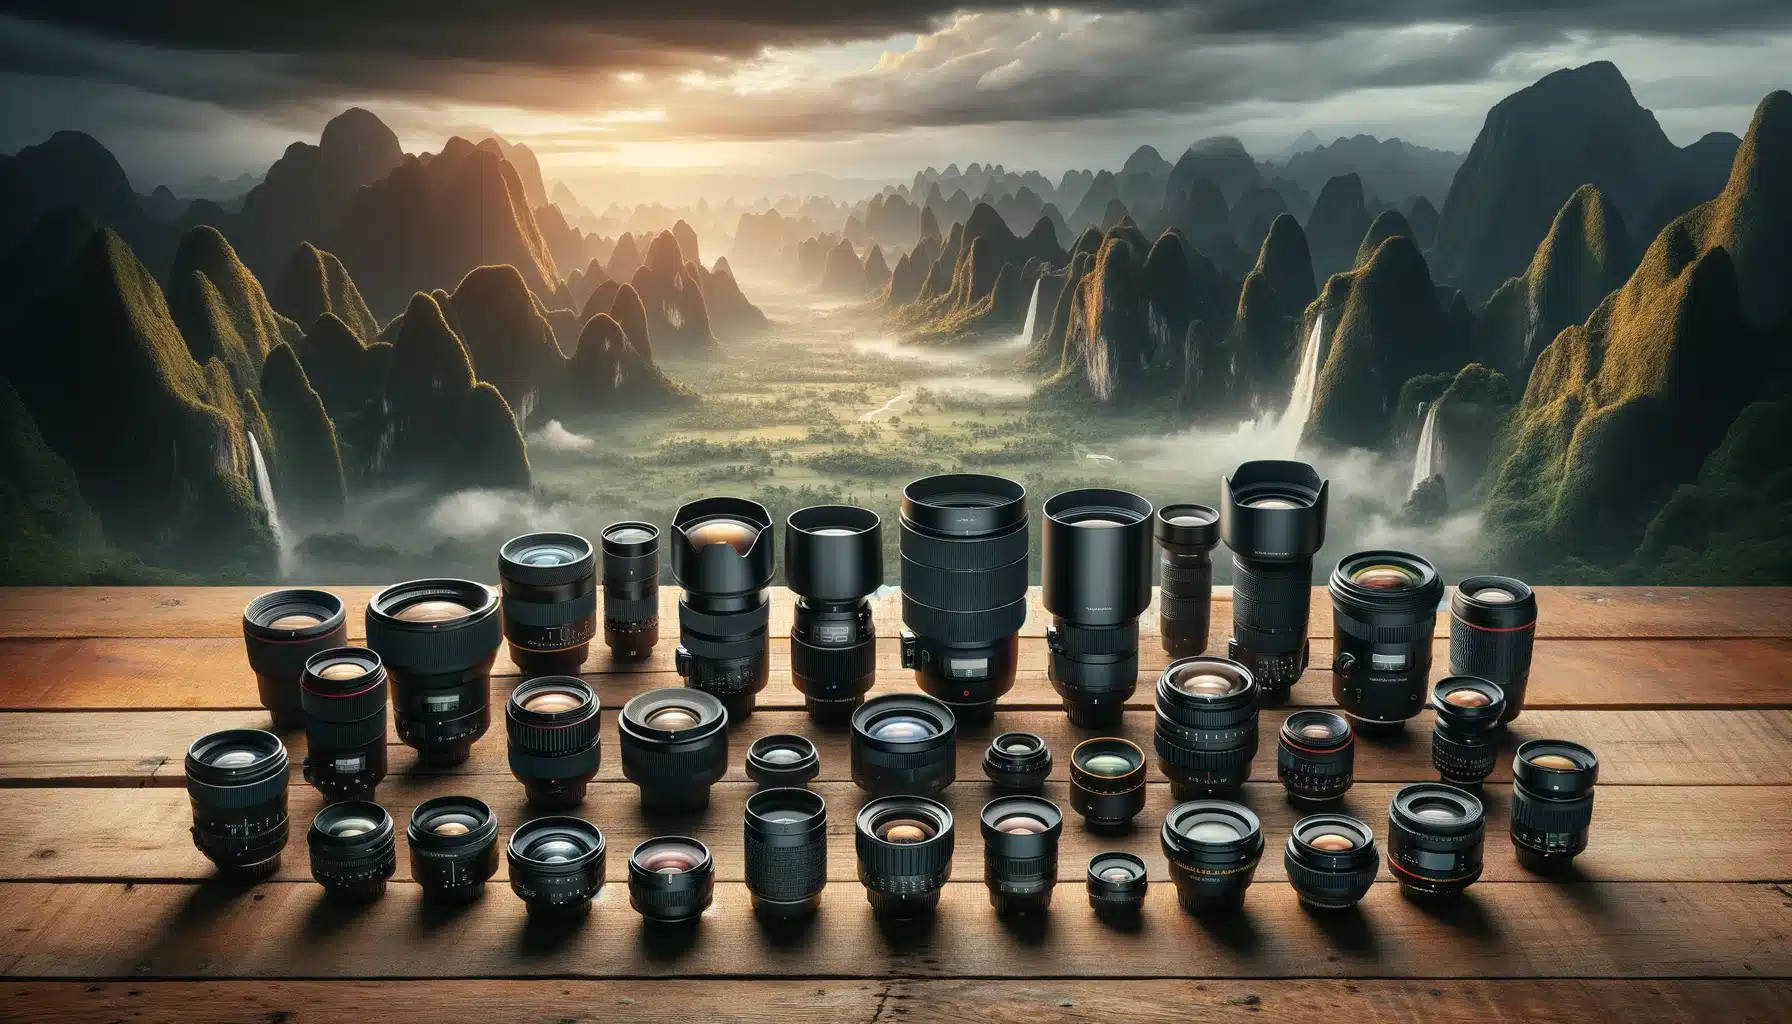 Variety of camera lenses on a table, from wide-angle to telephoto, with a landscape background.